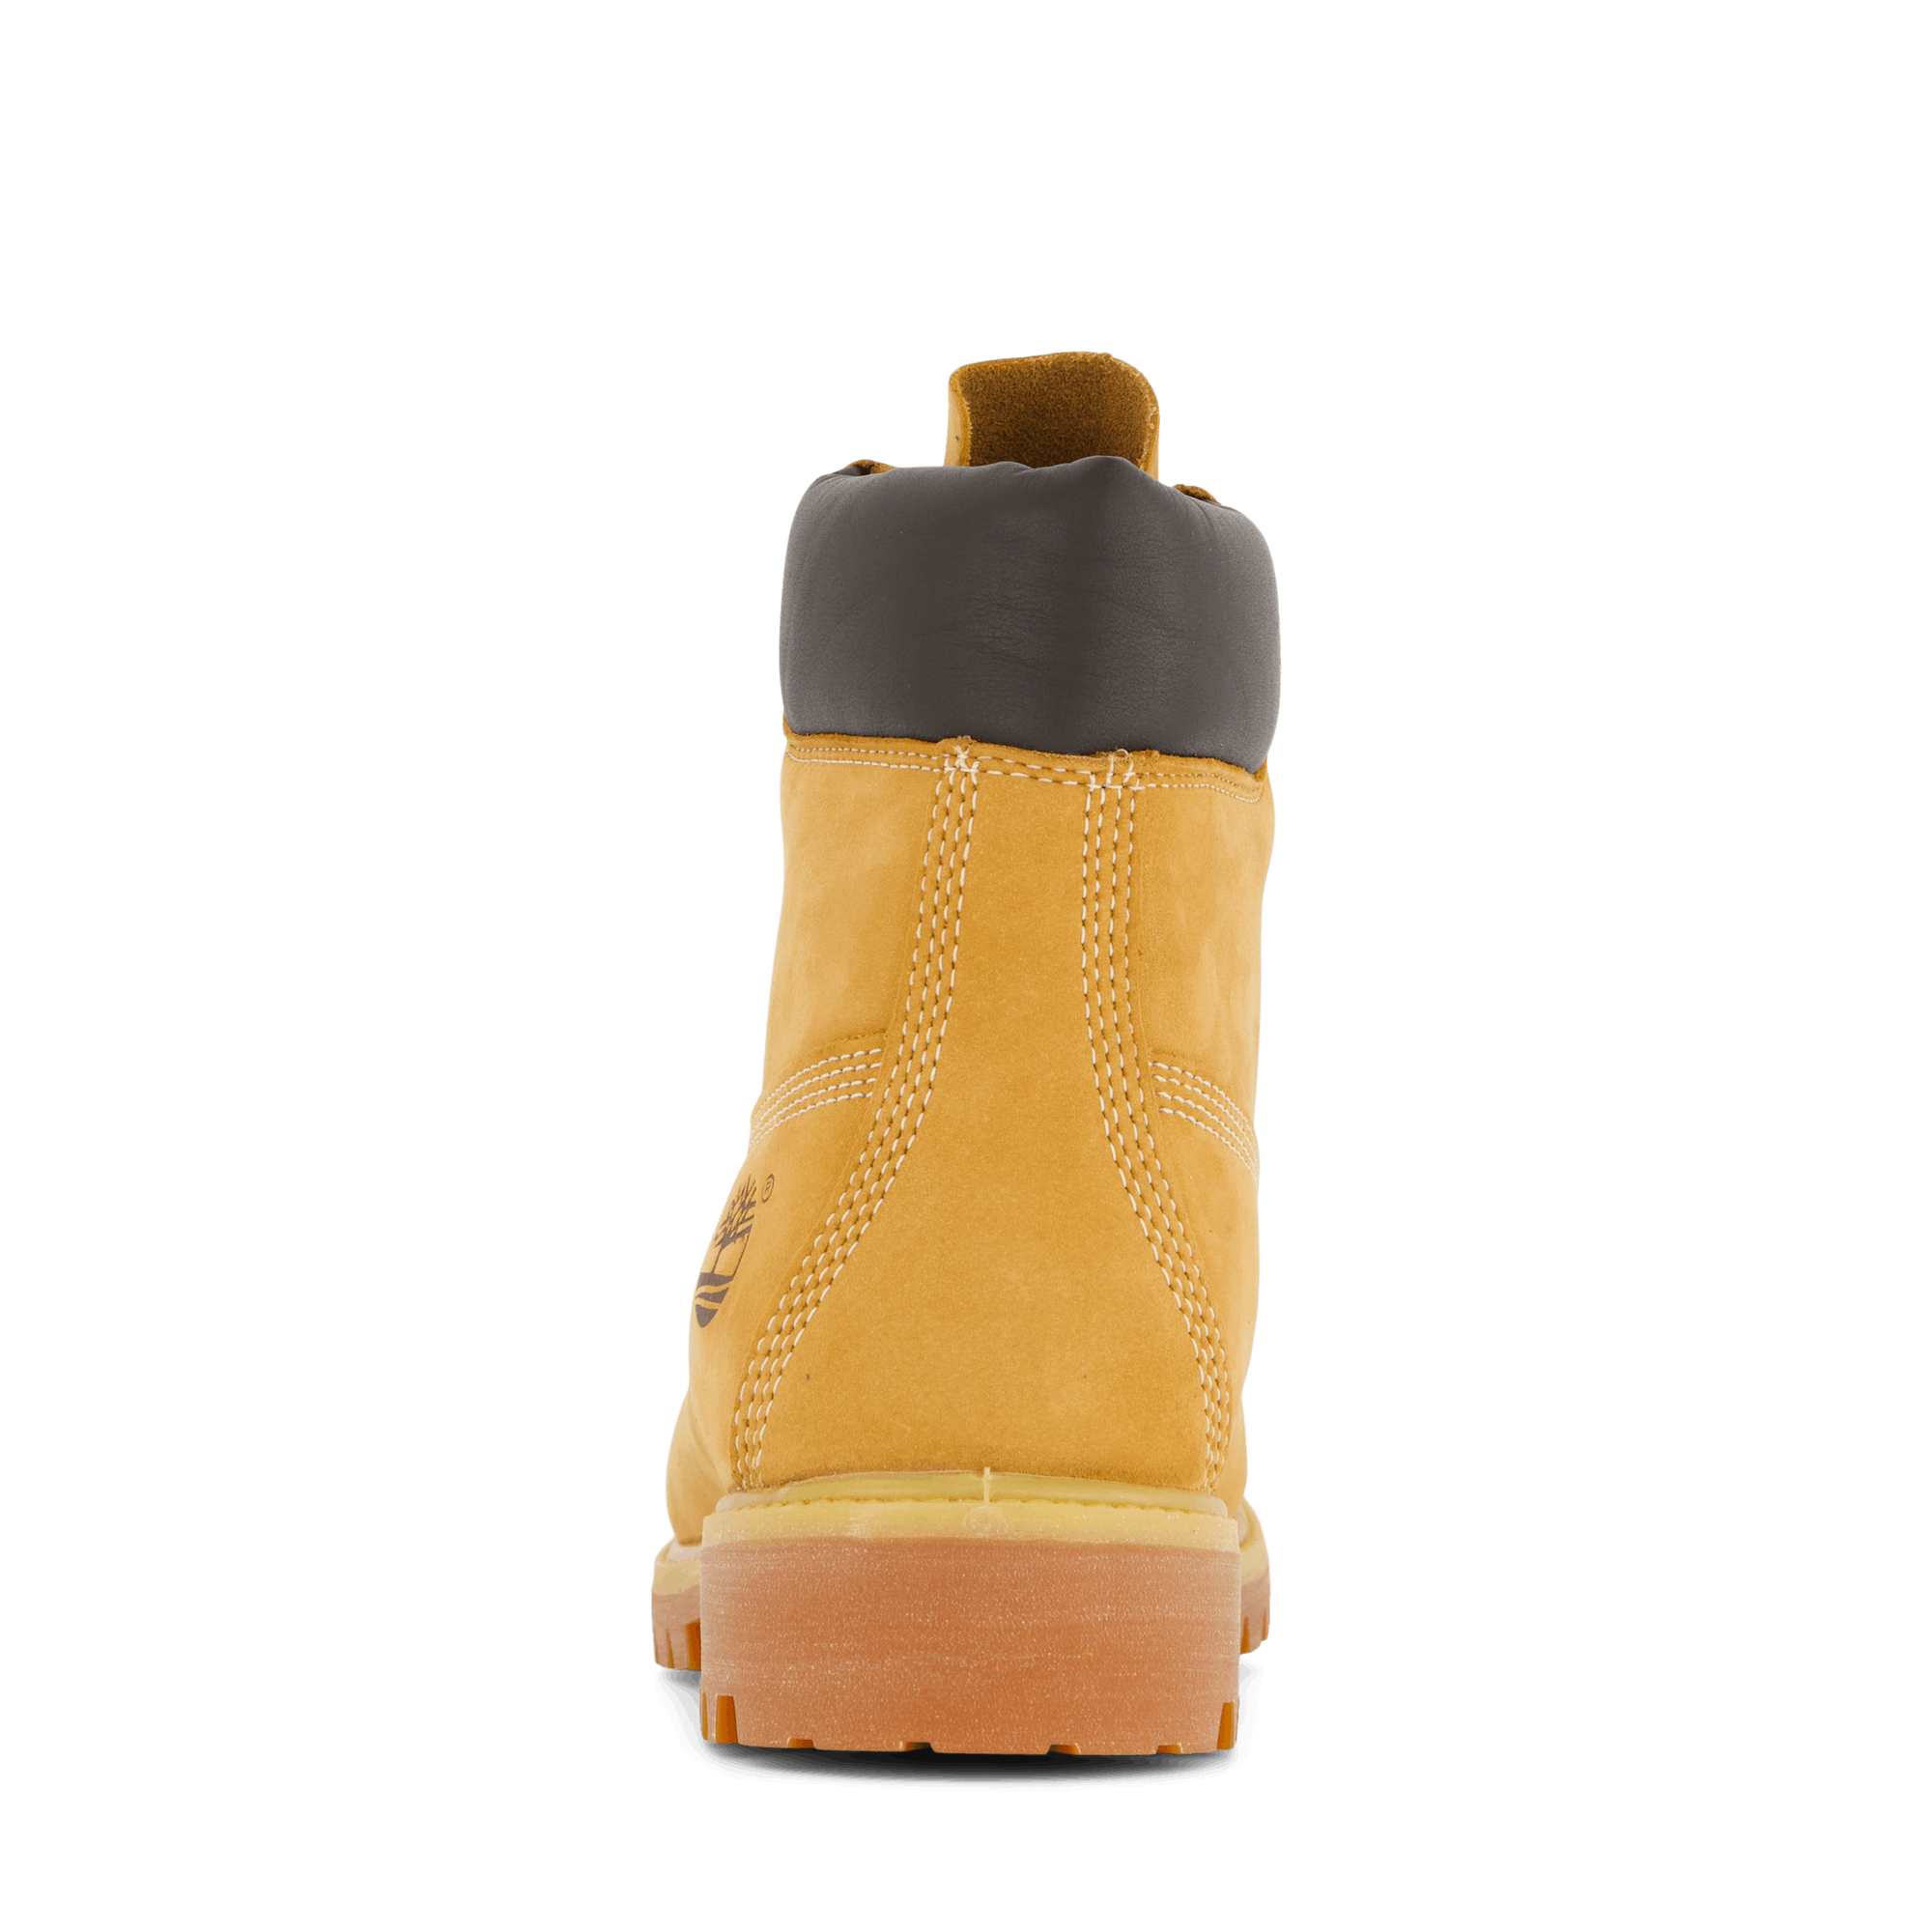 AF 6 Inch Premium Boot Wheat Wheat